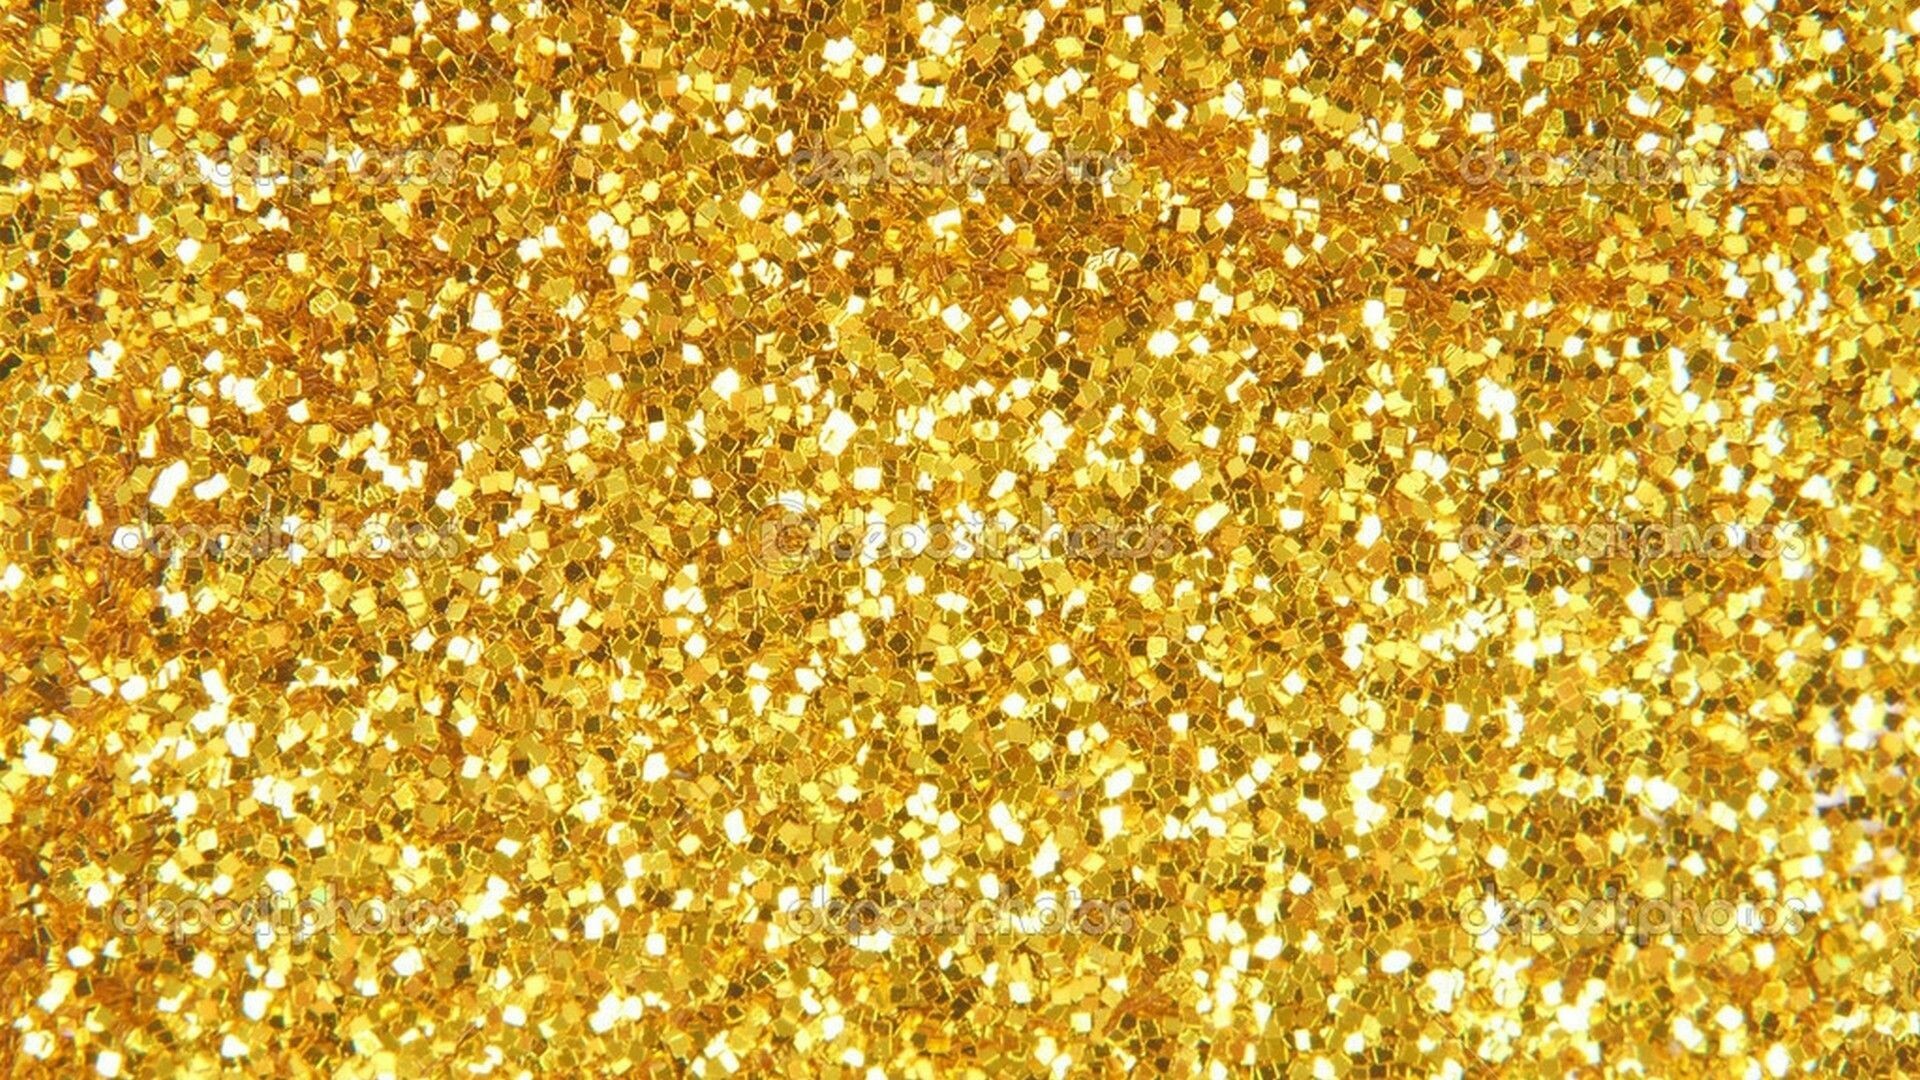 Sparkle: Gold glitter, Can stick to clothing, skin, and furniture. 1920x1080 Full HD Wallpaper.